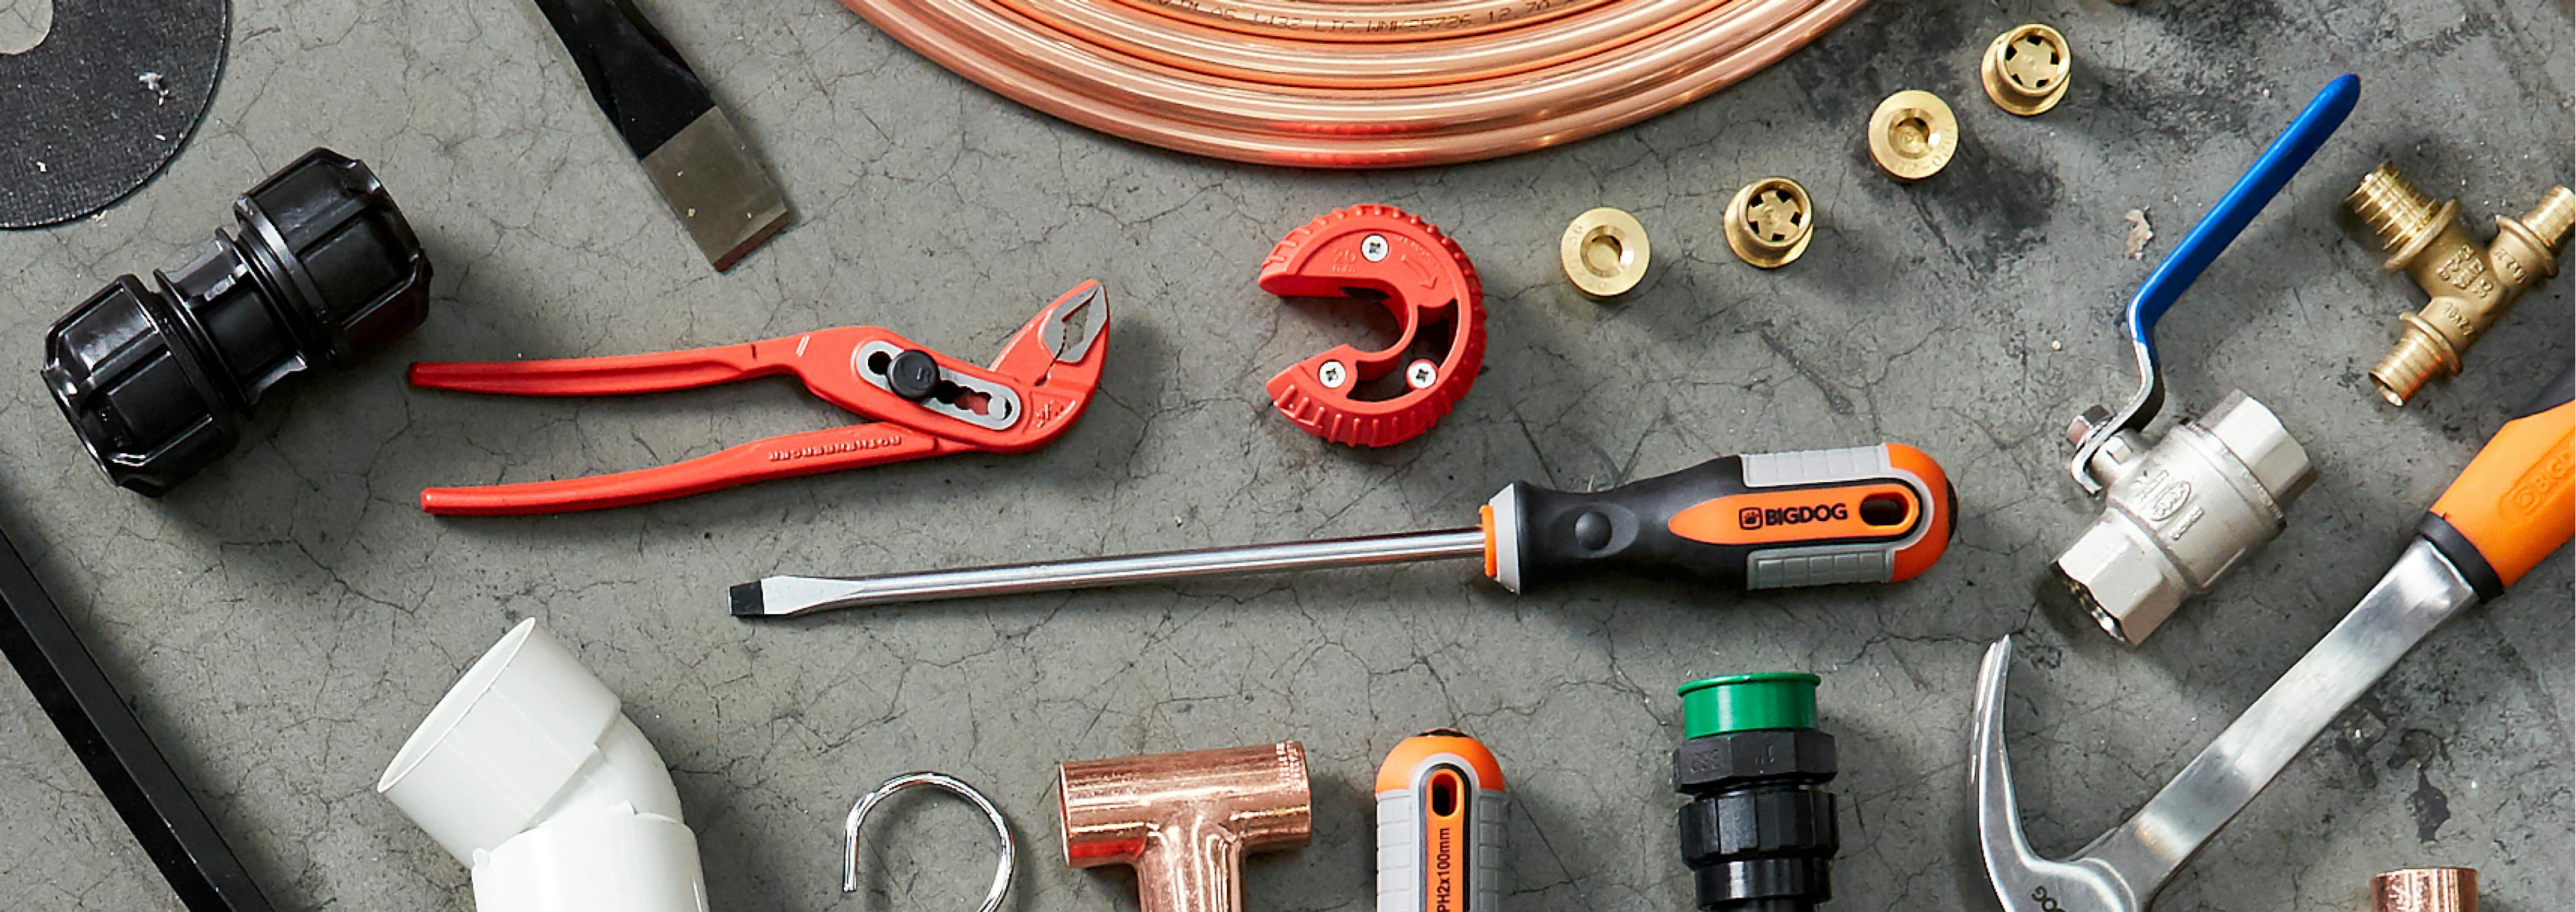 Tools and plumbing parts